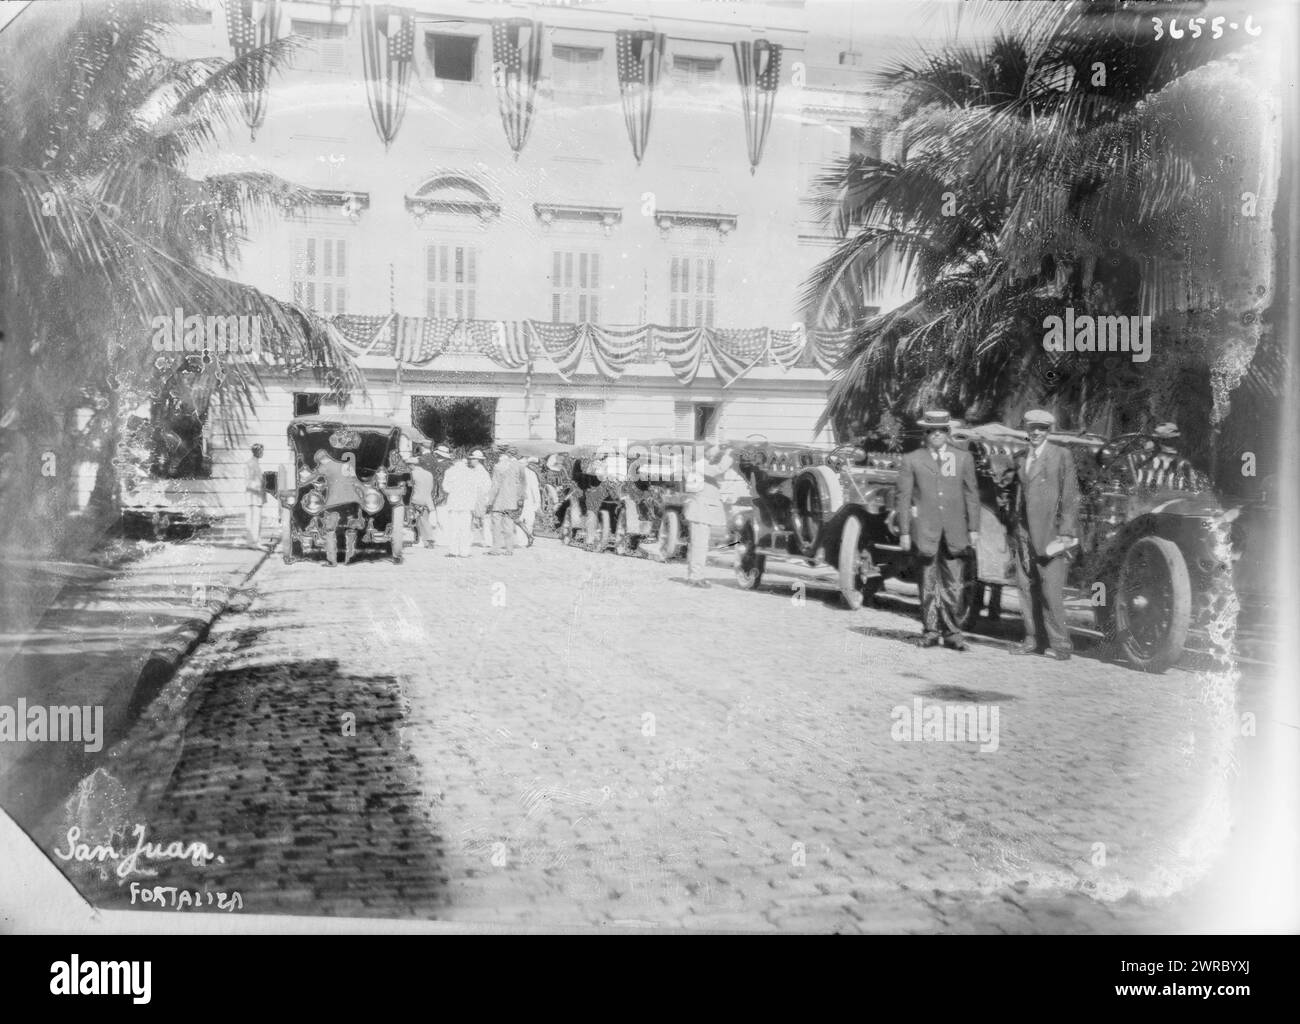 San Juan Fortaliza, Photograph shows La Fortaleza (The Fortress),the official residence of the Governor of Puerto Rico in San Juan., between ca. 1910 and ca. 1915, Glass negatives, 1 negative: glass Stock Photo